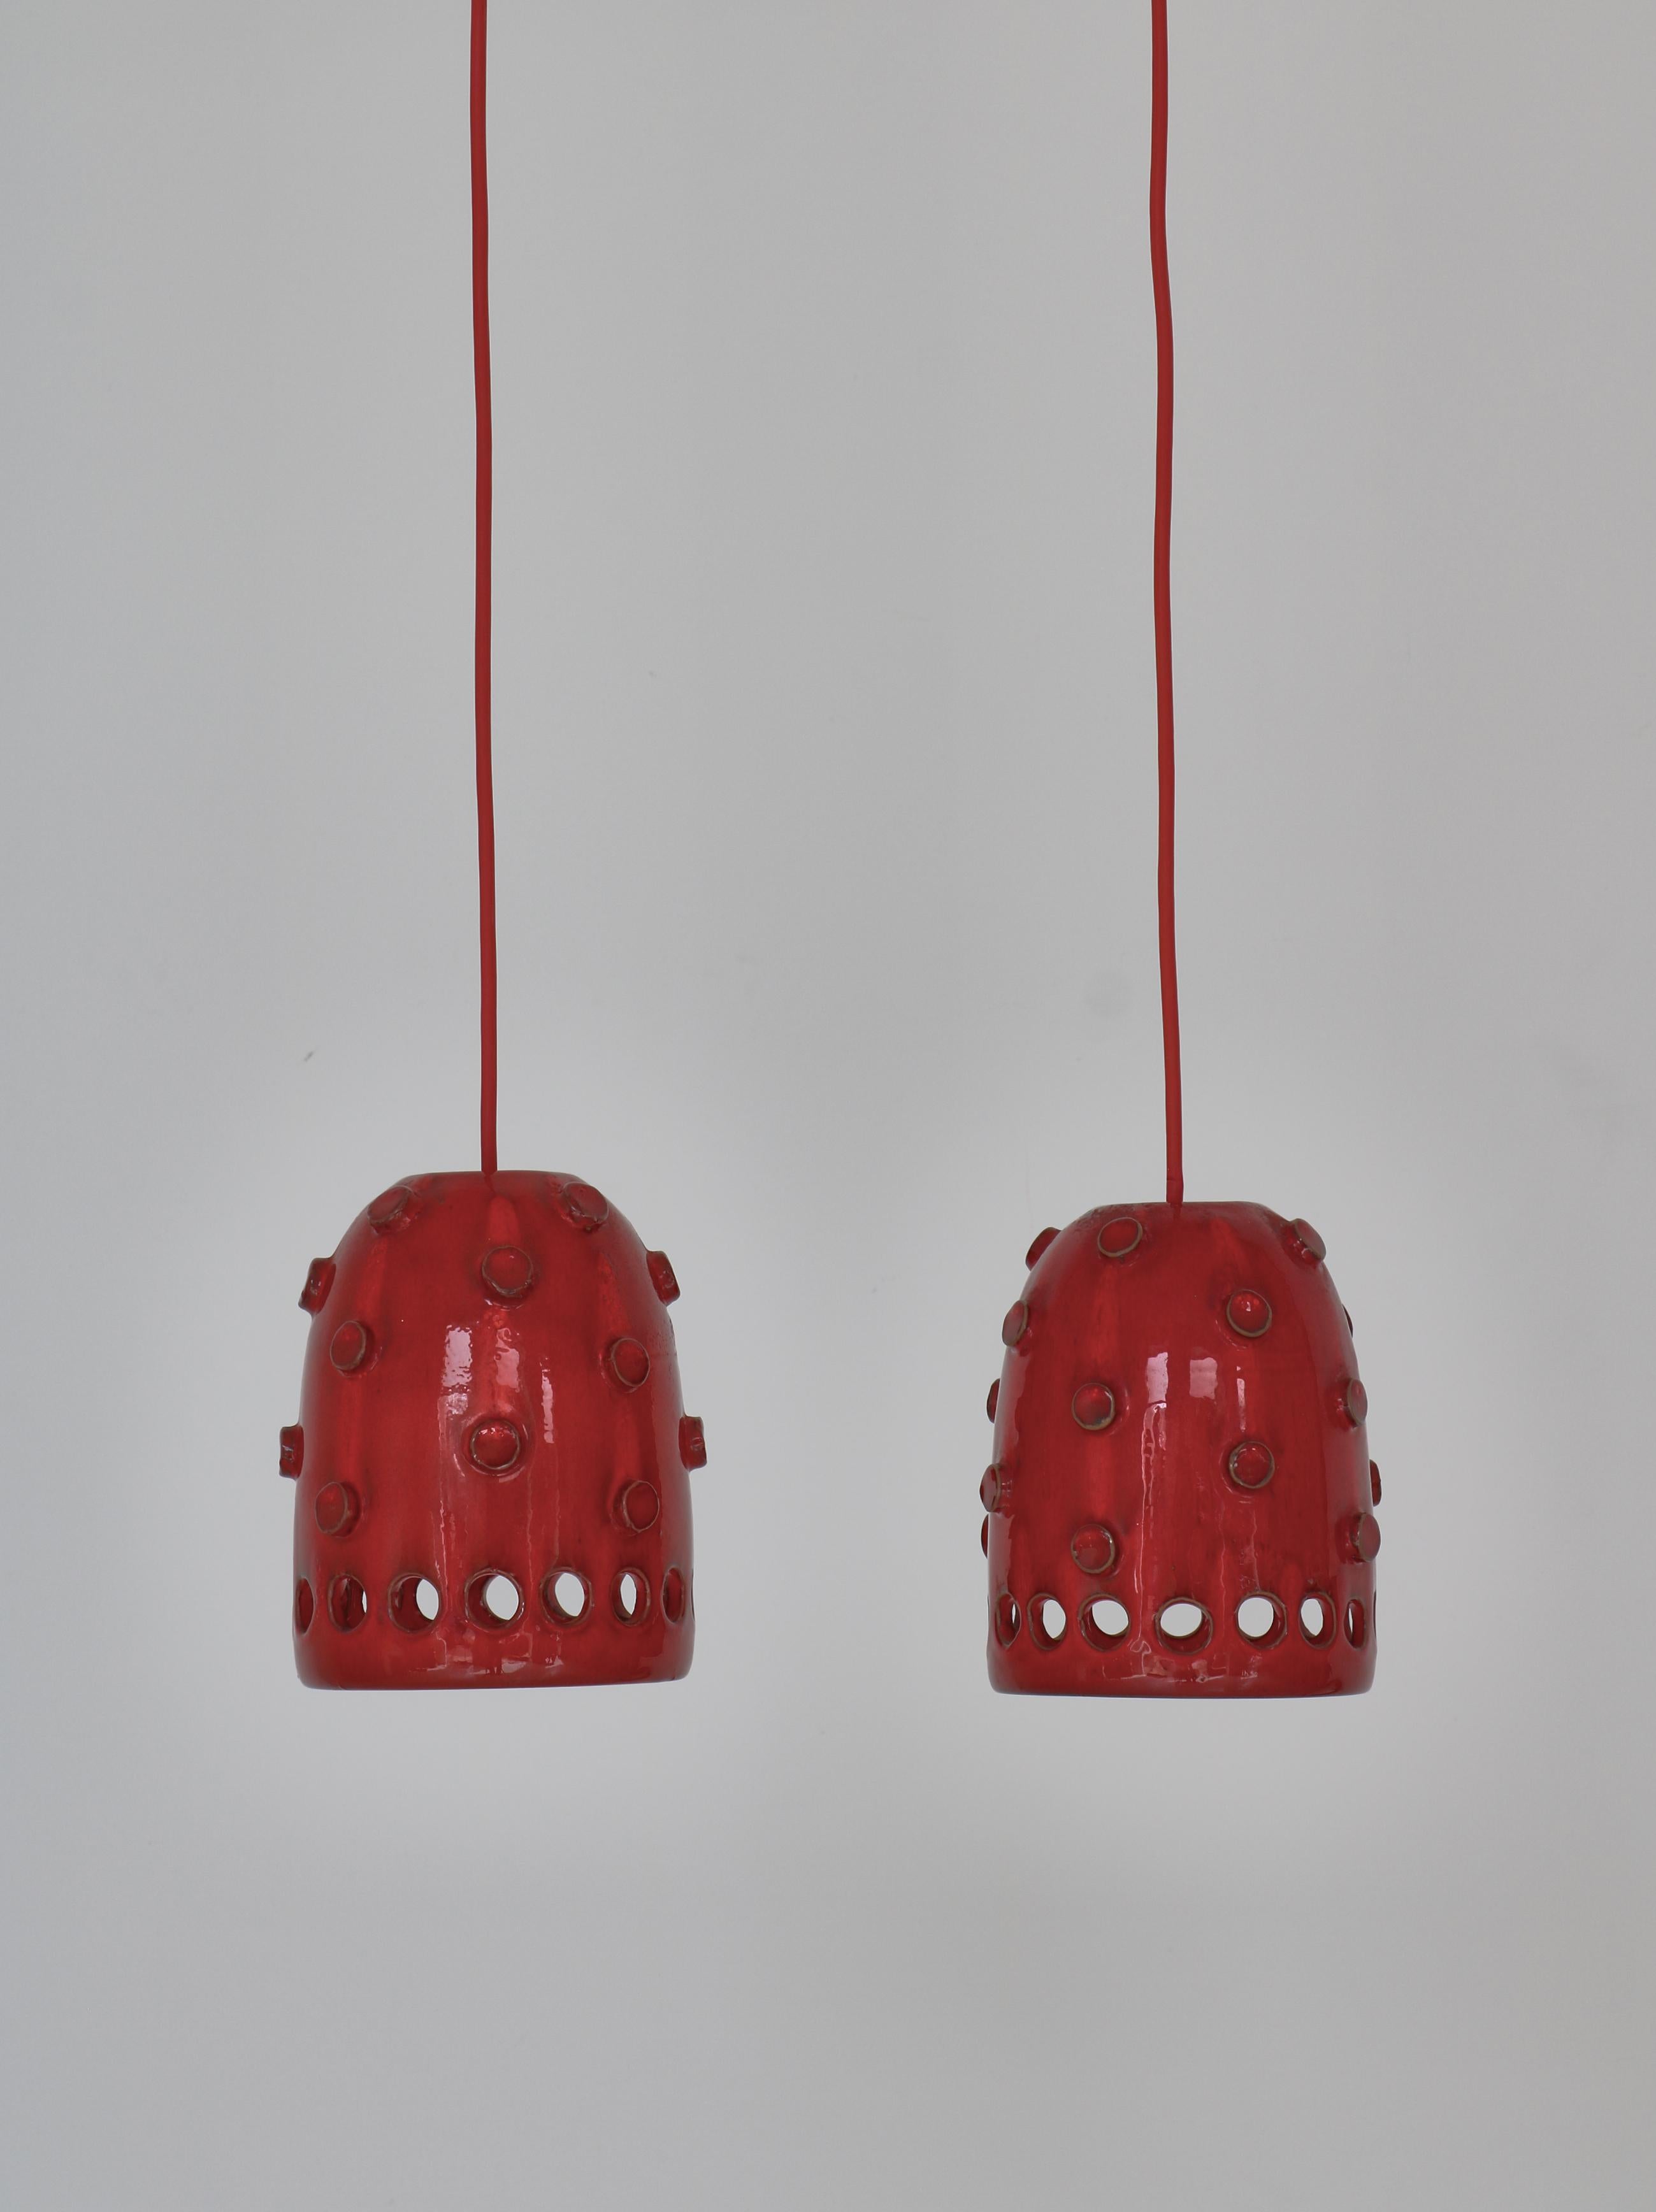 Danish Modern Red Ceramics Pendants by Jette Hellerøe at Axella Studio, 1970s In Good Condition For Sale In Odense, DK